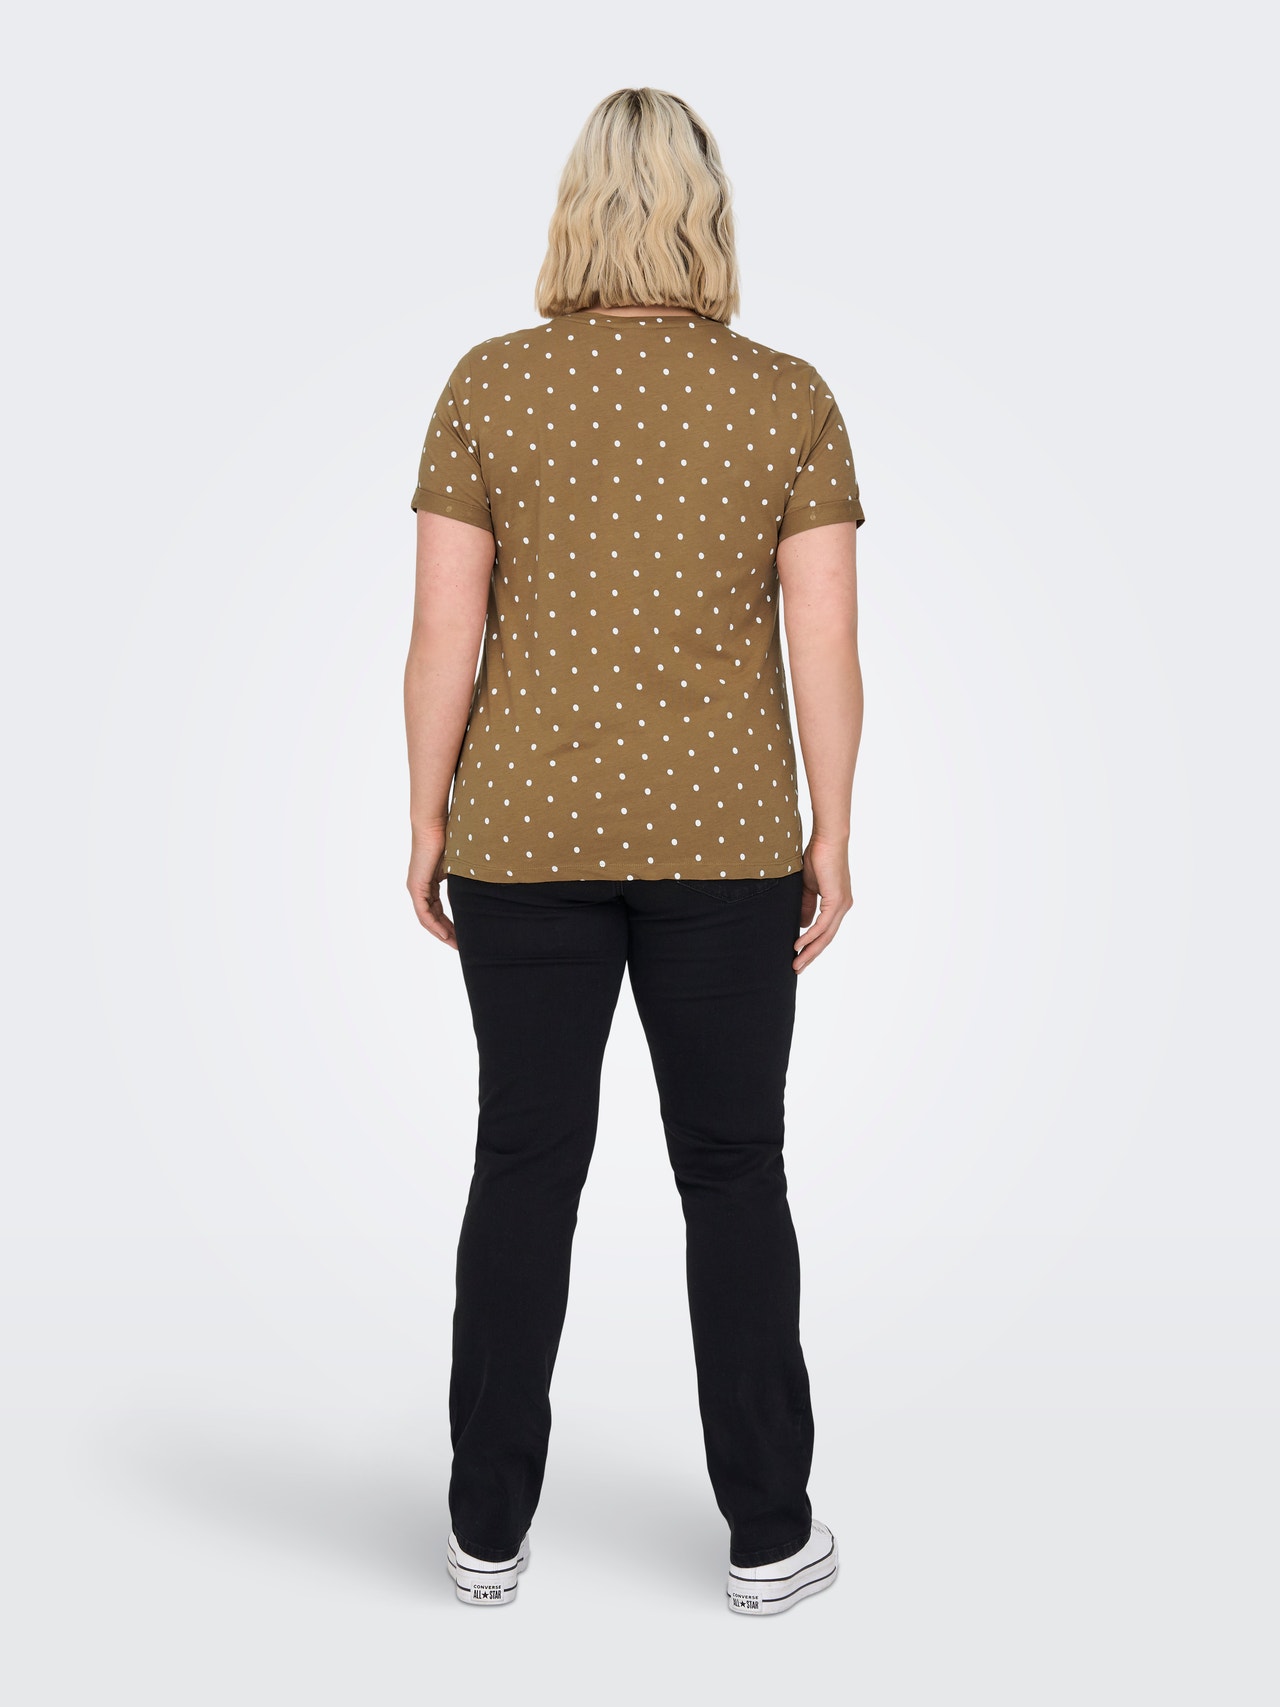 ONLY Curvy dotted t-shirt -Toasted Coconut - 15290406